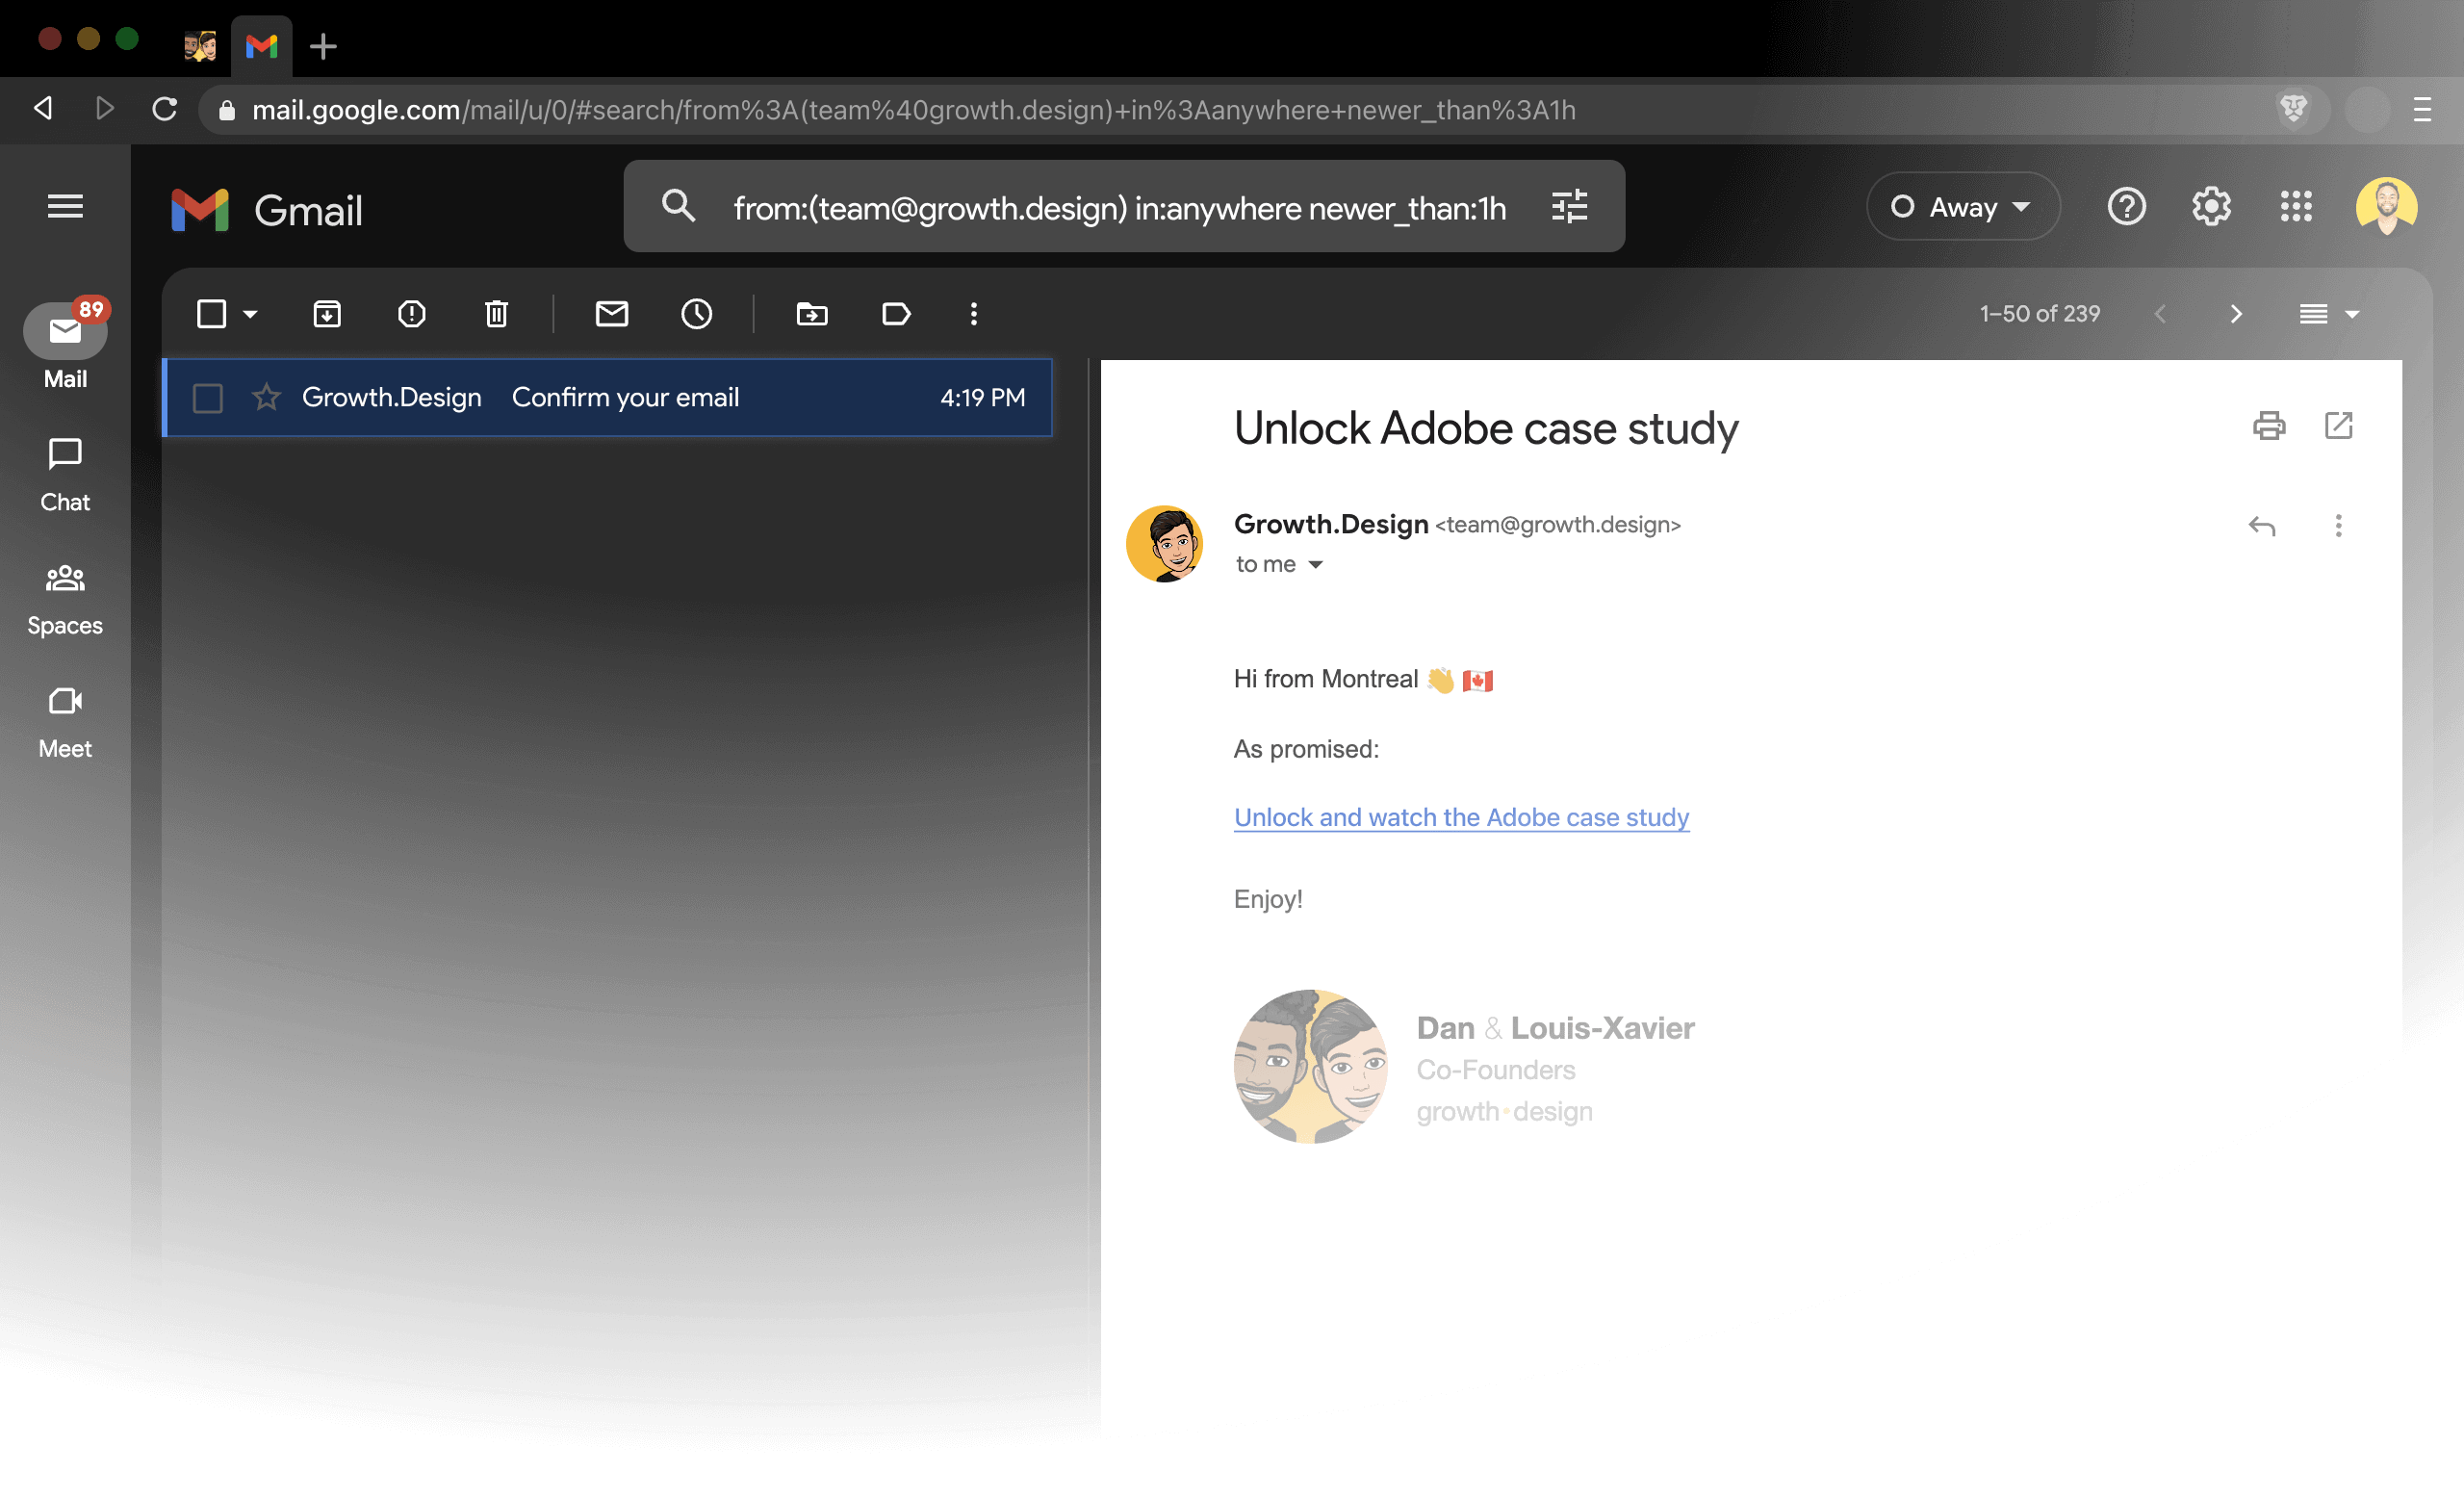 Sniper Link example in Gmail